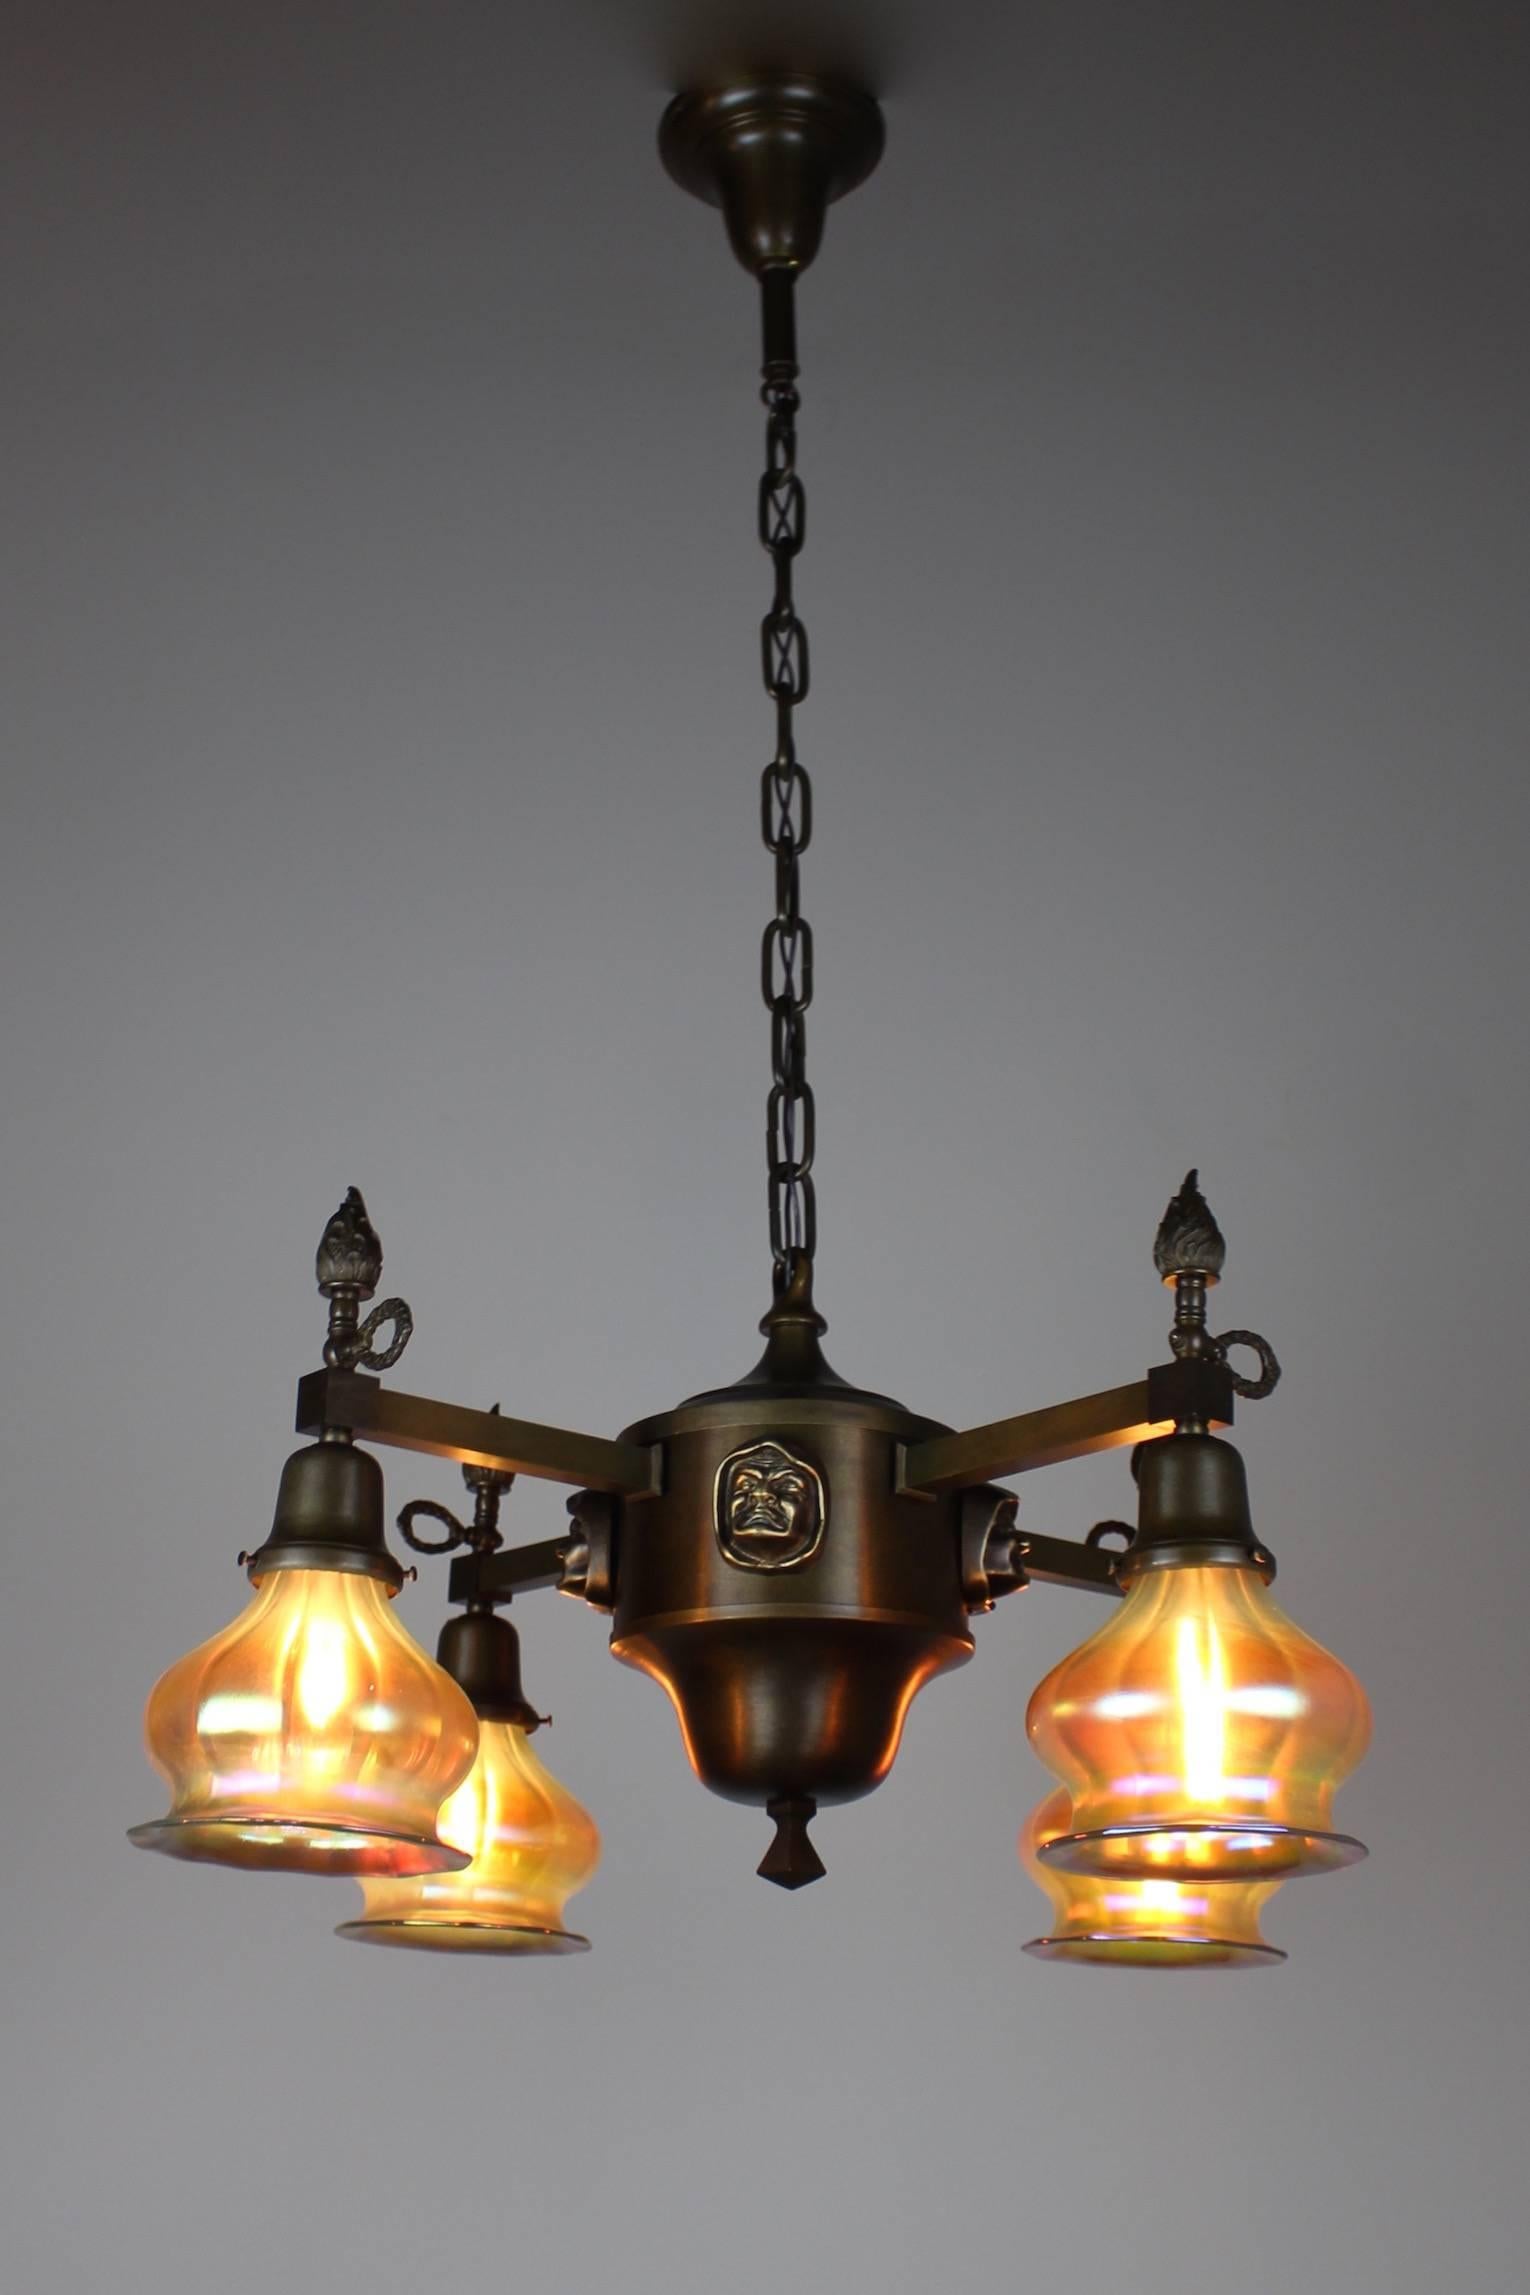 An fantastic Arts & Crafts light, originally sourced in New Westminister, BC. Attributed to Bauer of Philadelphia, circa 1905. This fixture has been composed with a beautiful and somewhat Avant Garde Silhouette and 'monk head' figural motif,